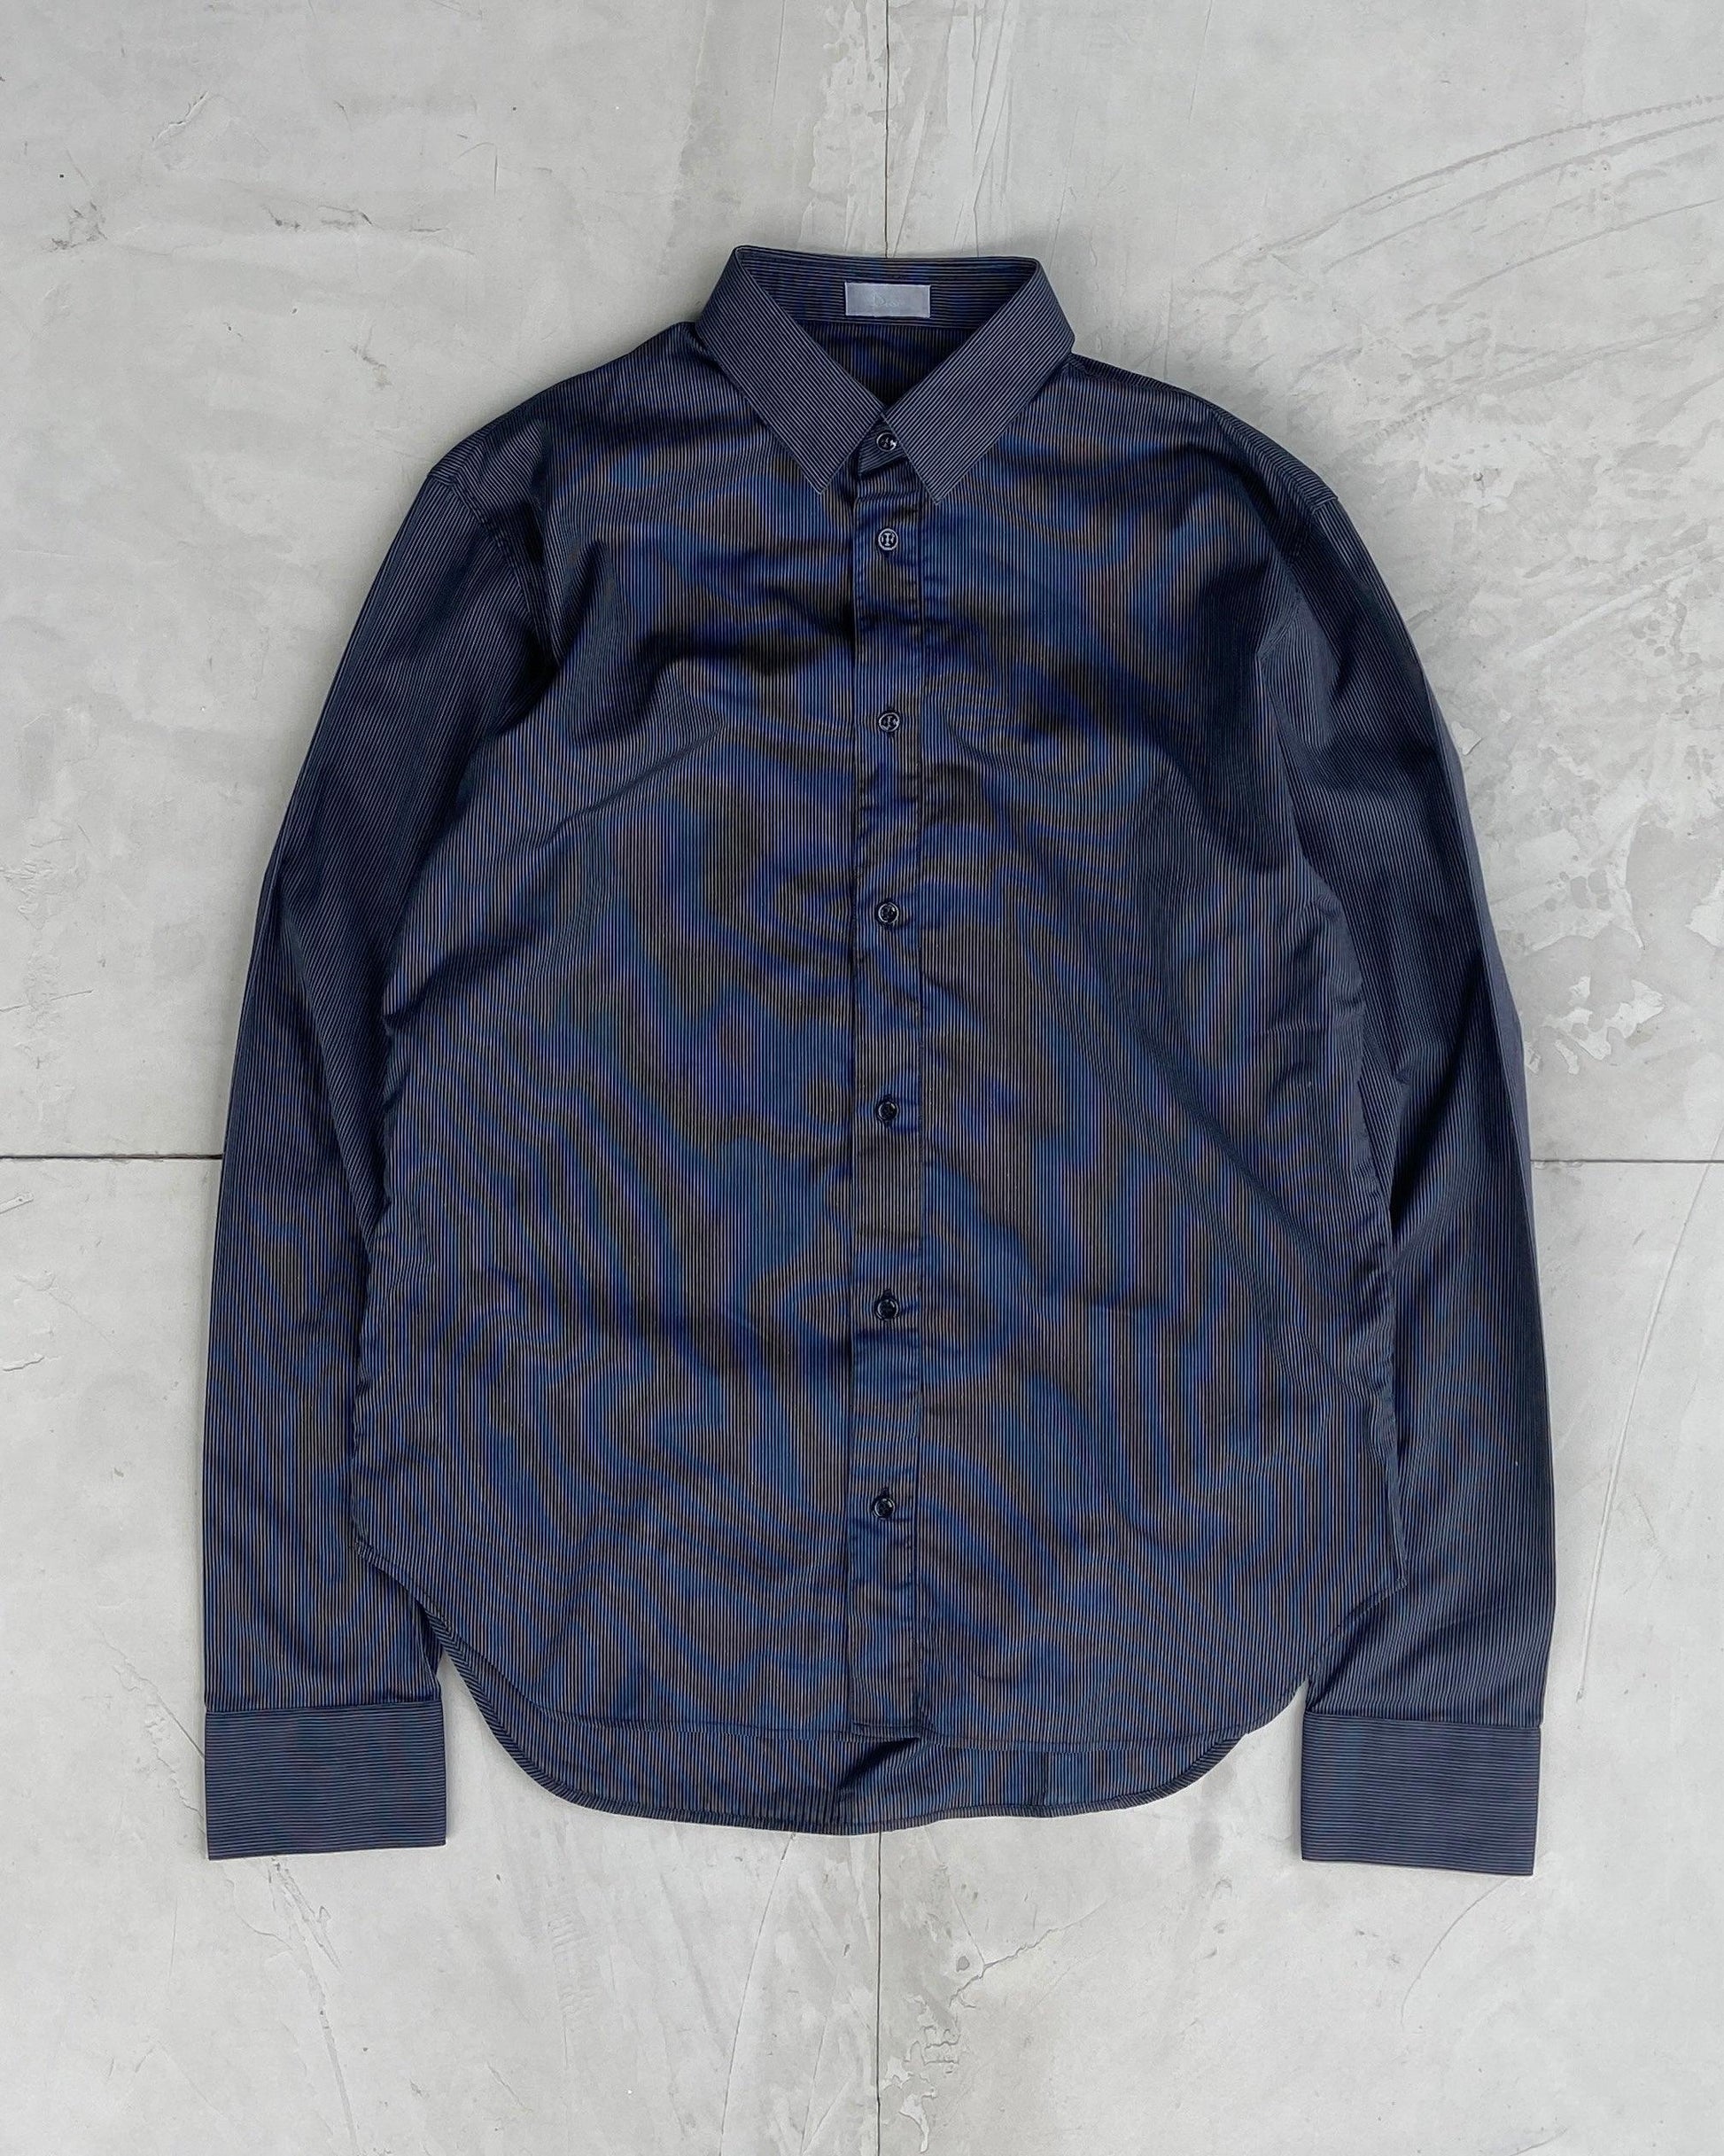 DIOR STRIPED LONG SLEEVE COLLARED SHIRT - L - Known Source